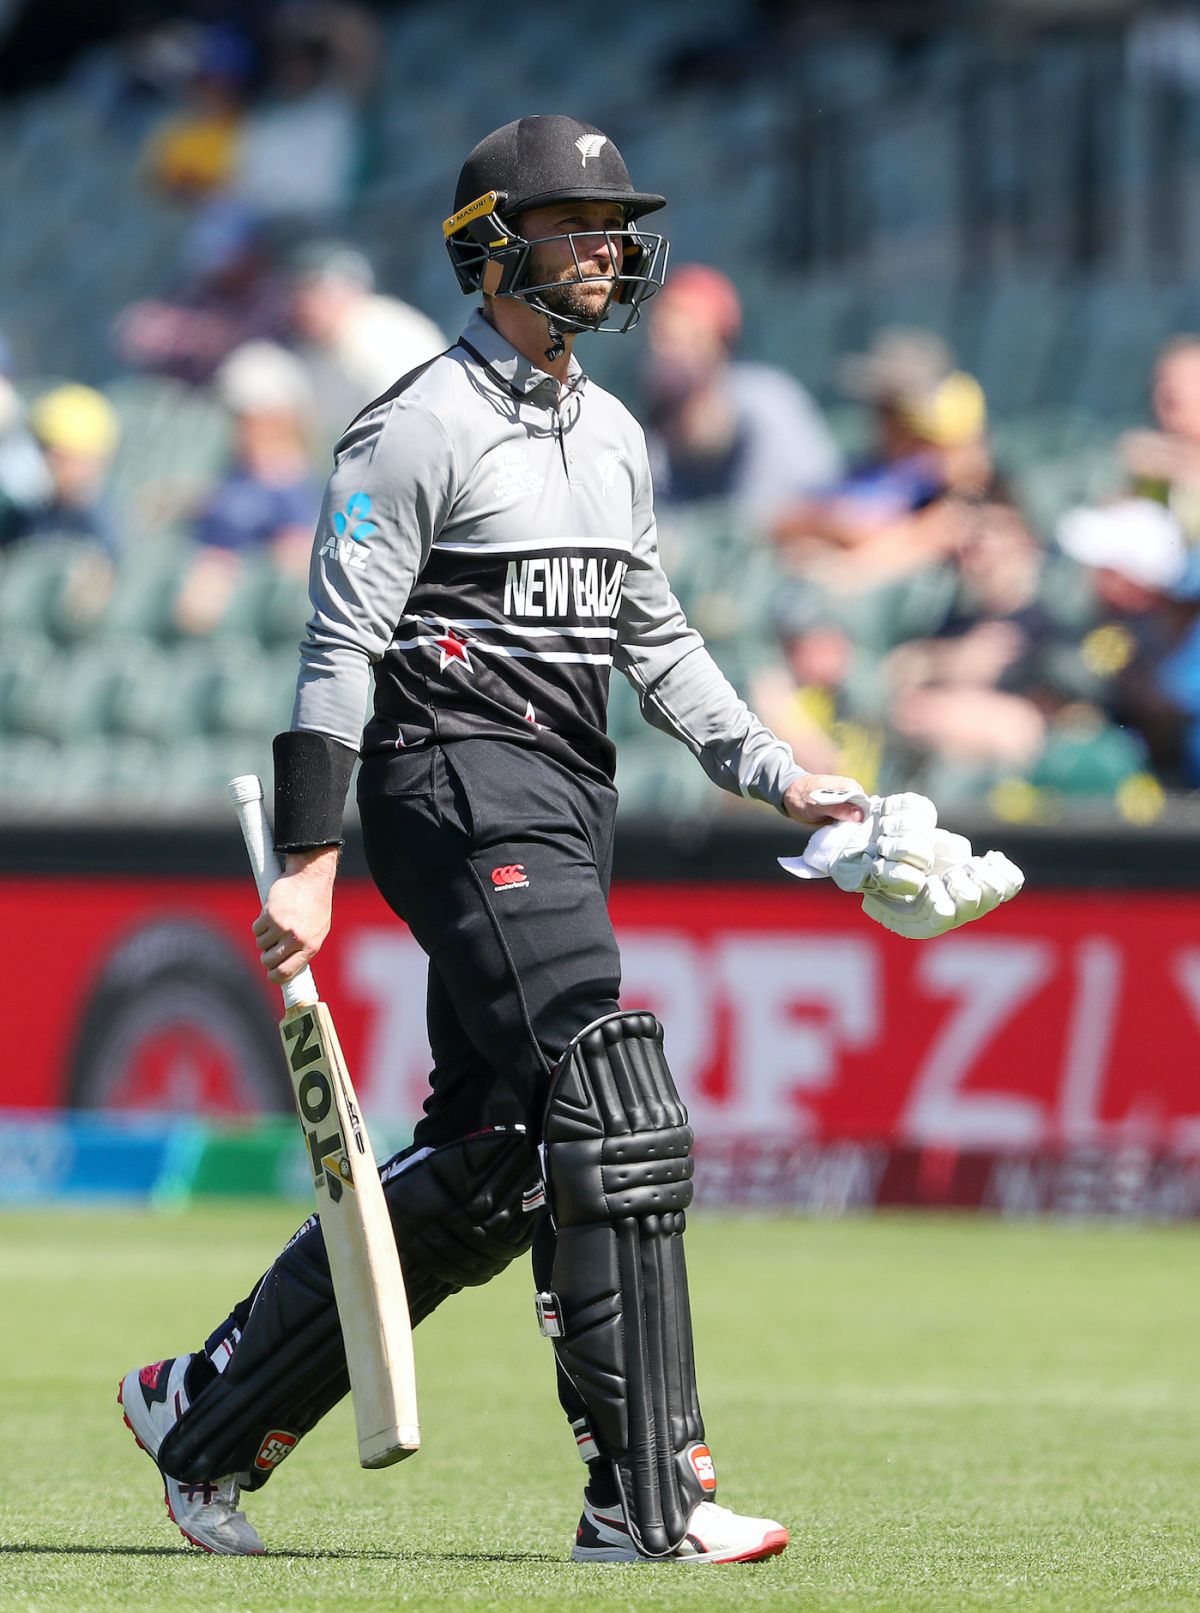 Devon Conway bided his time at the crease but could not accelerate, Ireland vs New Zealand, ICC Men's T20 World Cup 2022, Adelaide, November 4, 2022
